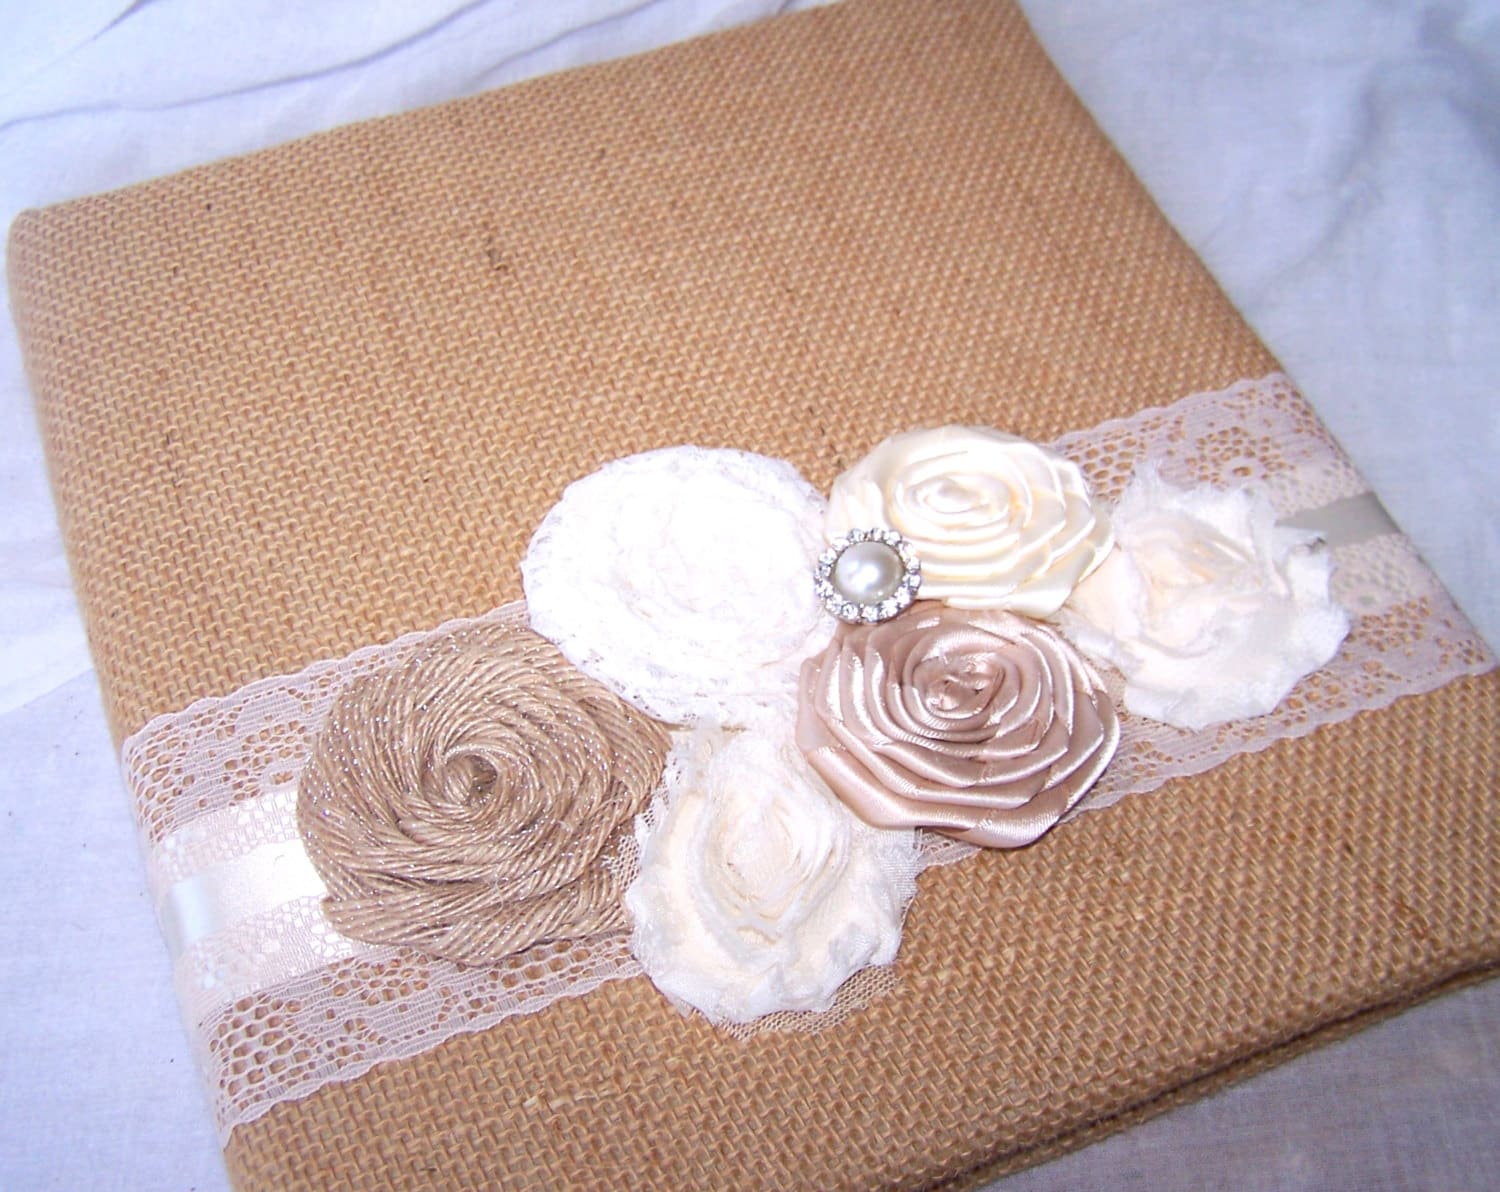 Burlap WEDDING GUEST BOOK with Photo Spot - Burlap and Lace, Ivory Lace, Shabby Chic Flower, Rosettes, Lace, Custom colors available